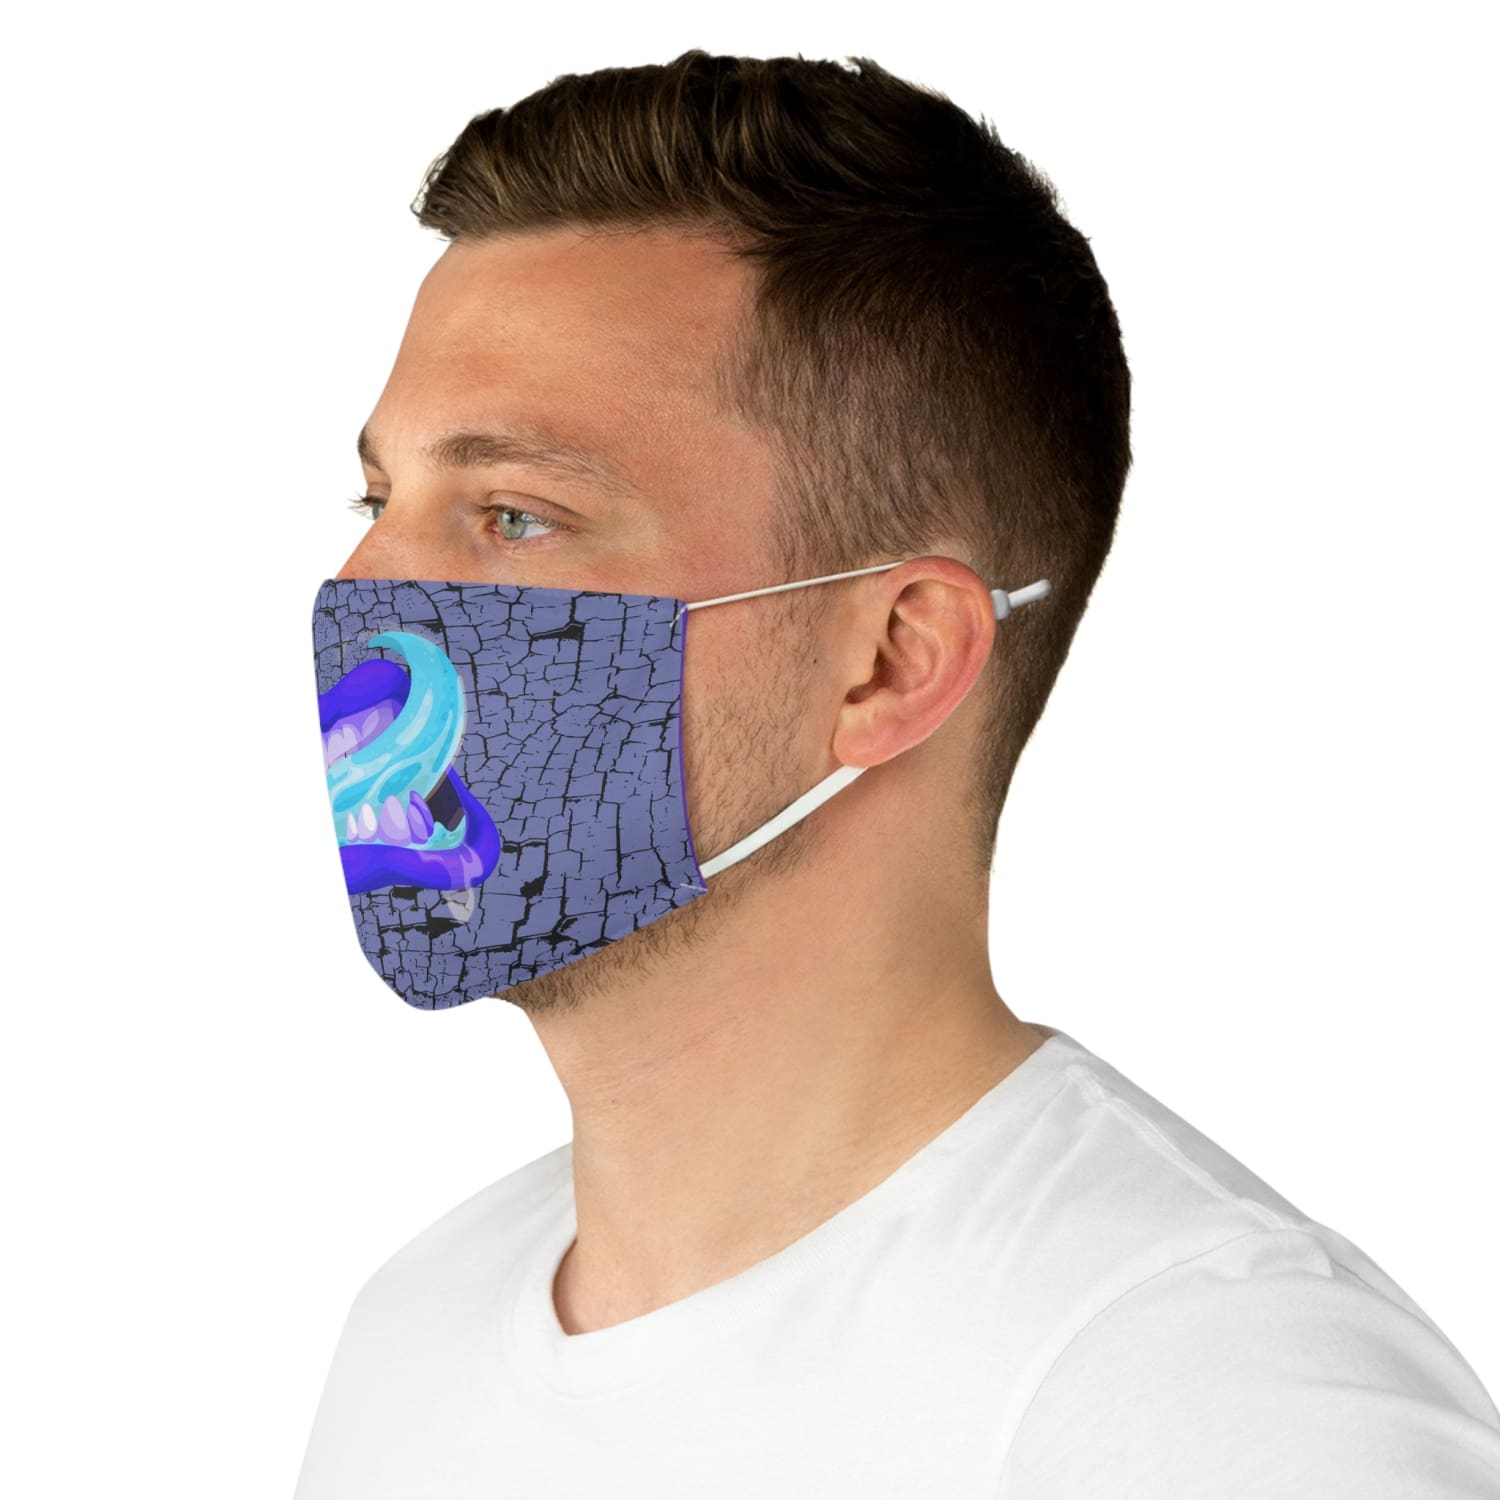 Blue Monster Mouth Fabric Face Mask - One size - Accessories